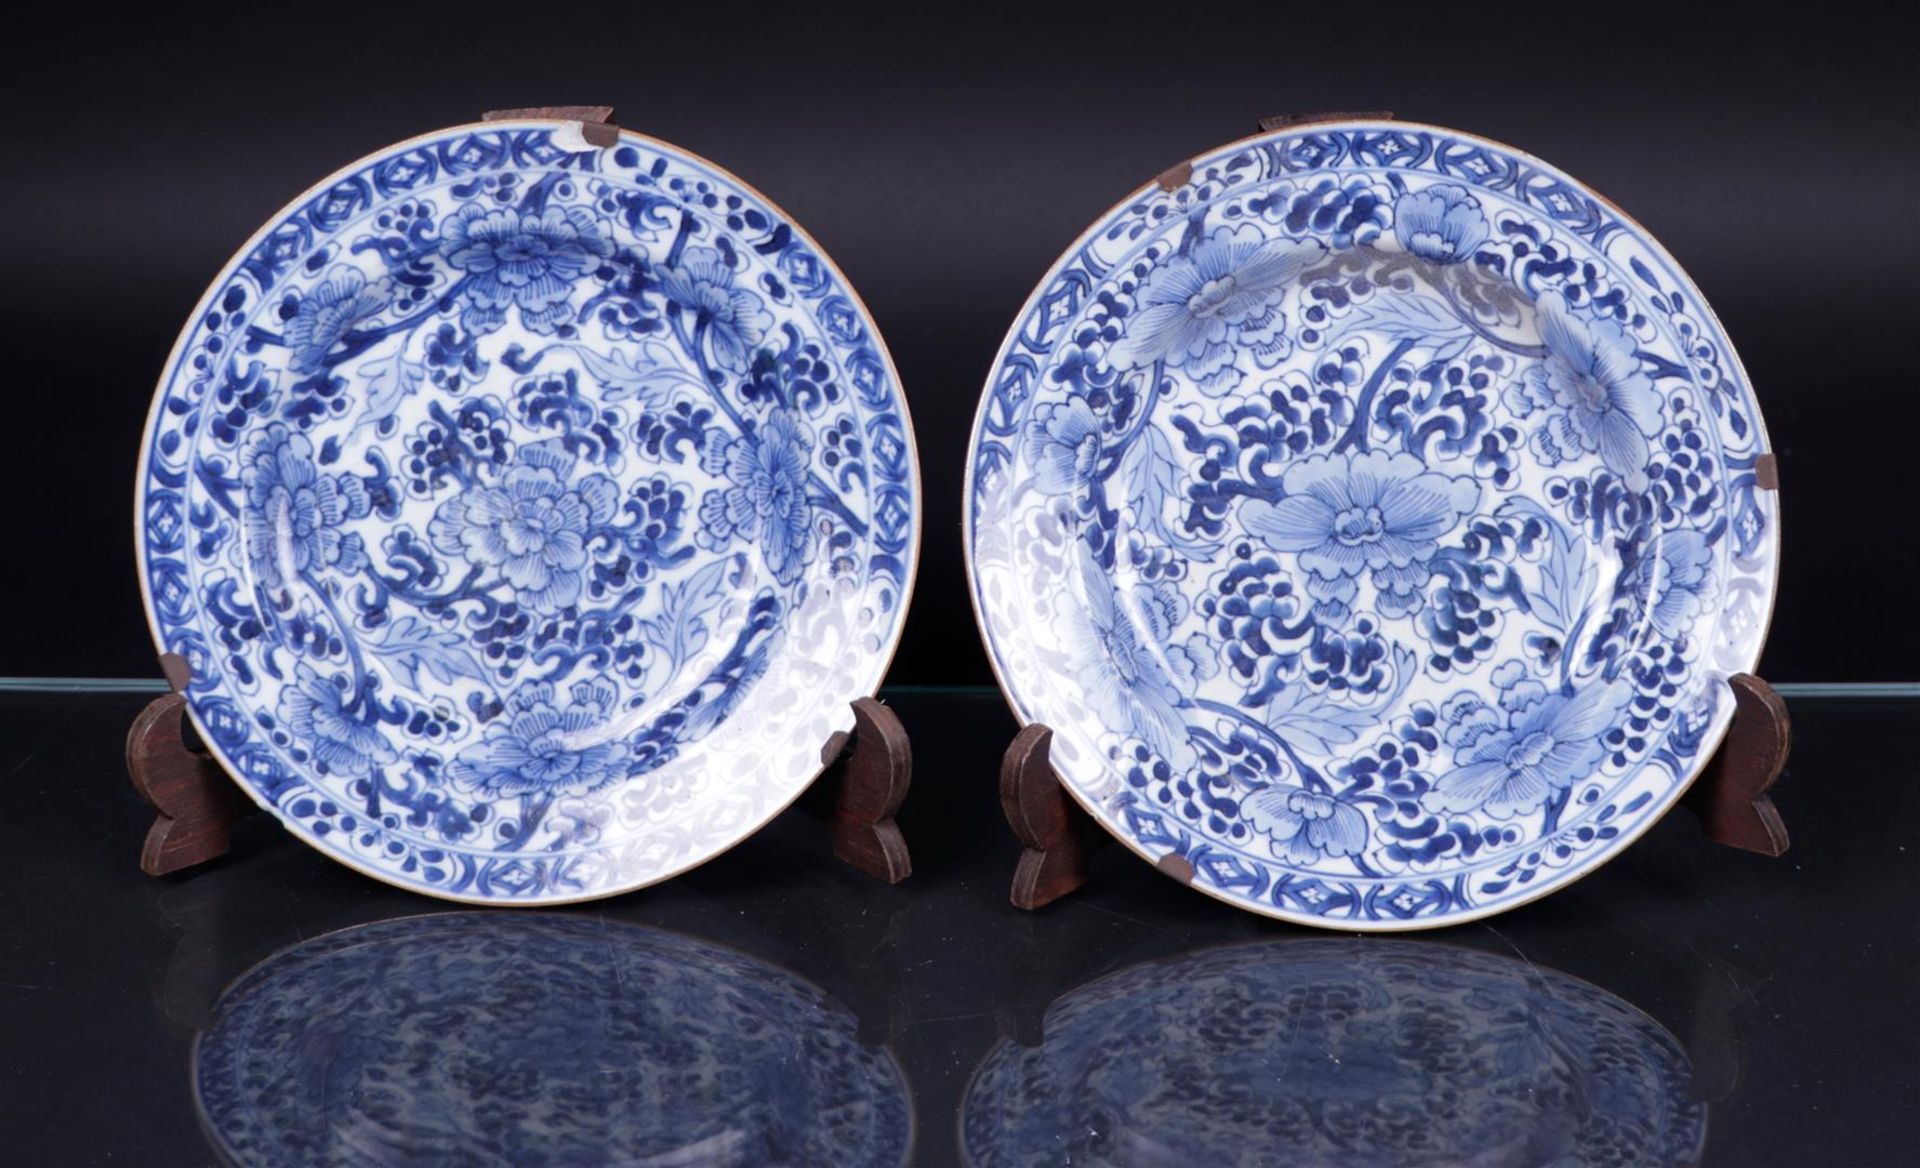 A set of porcelain plates with floral decor. China, 18th century